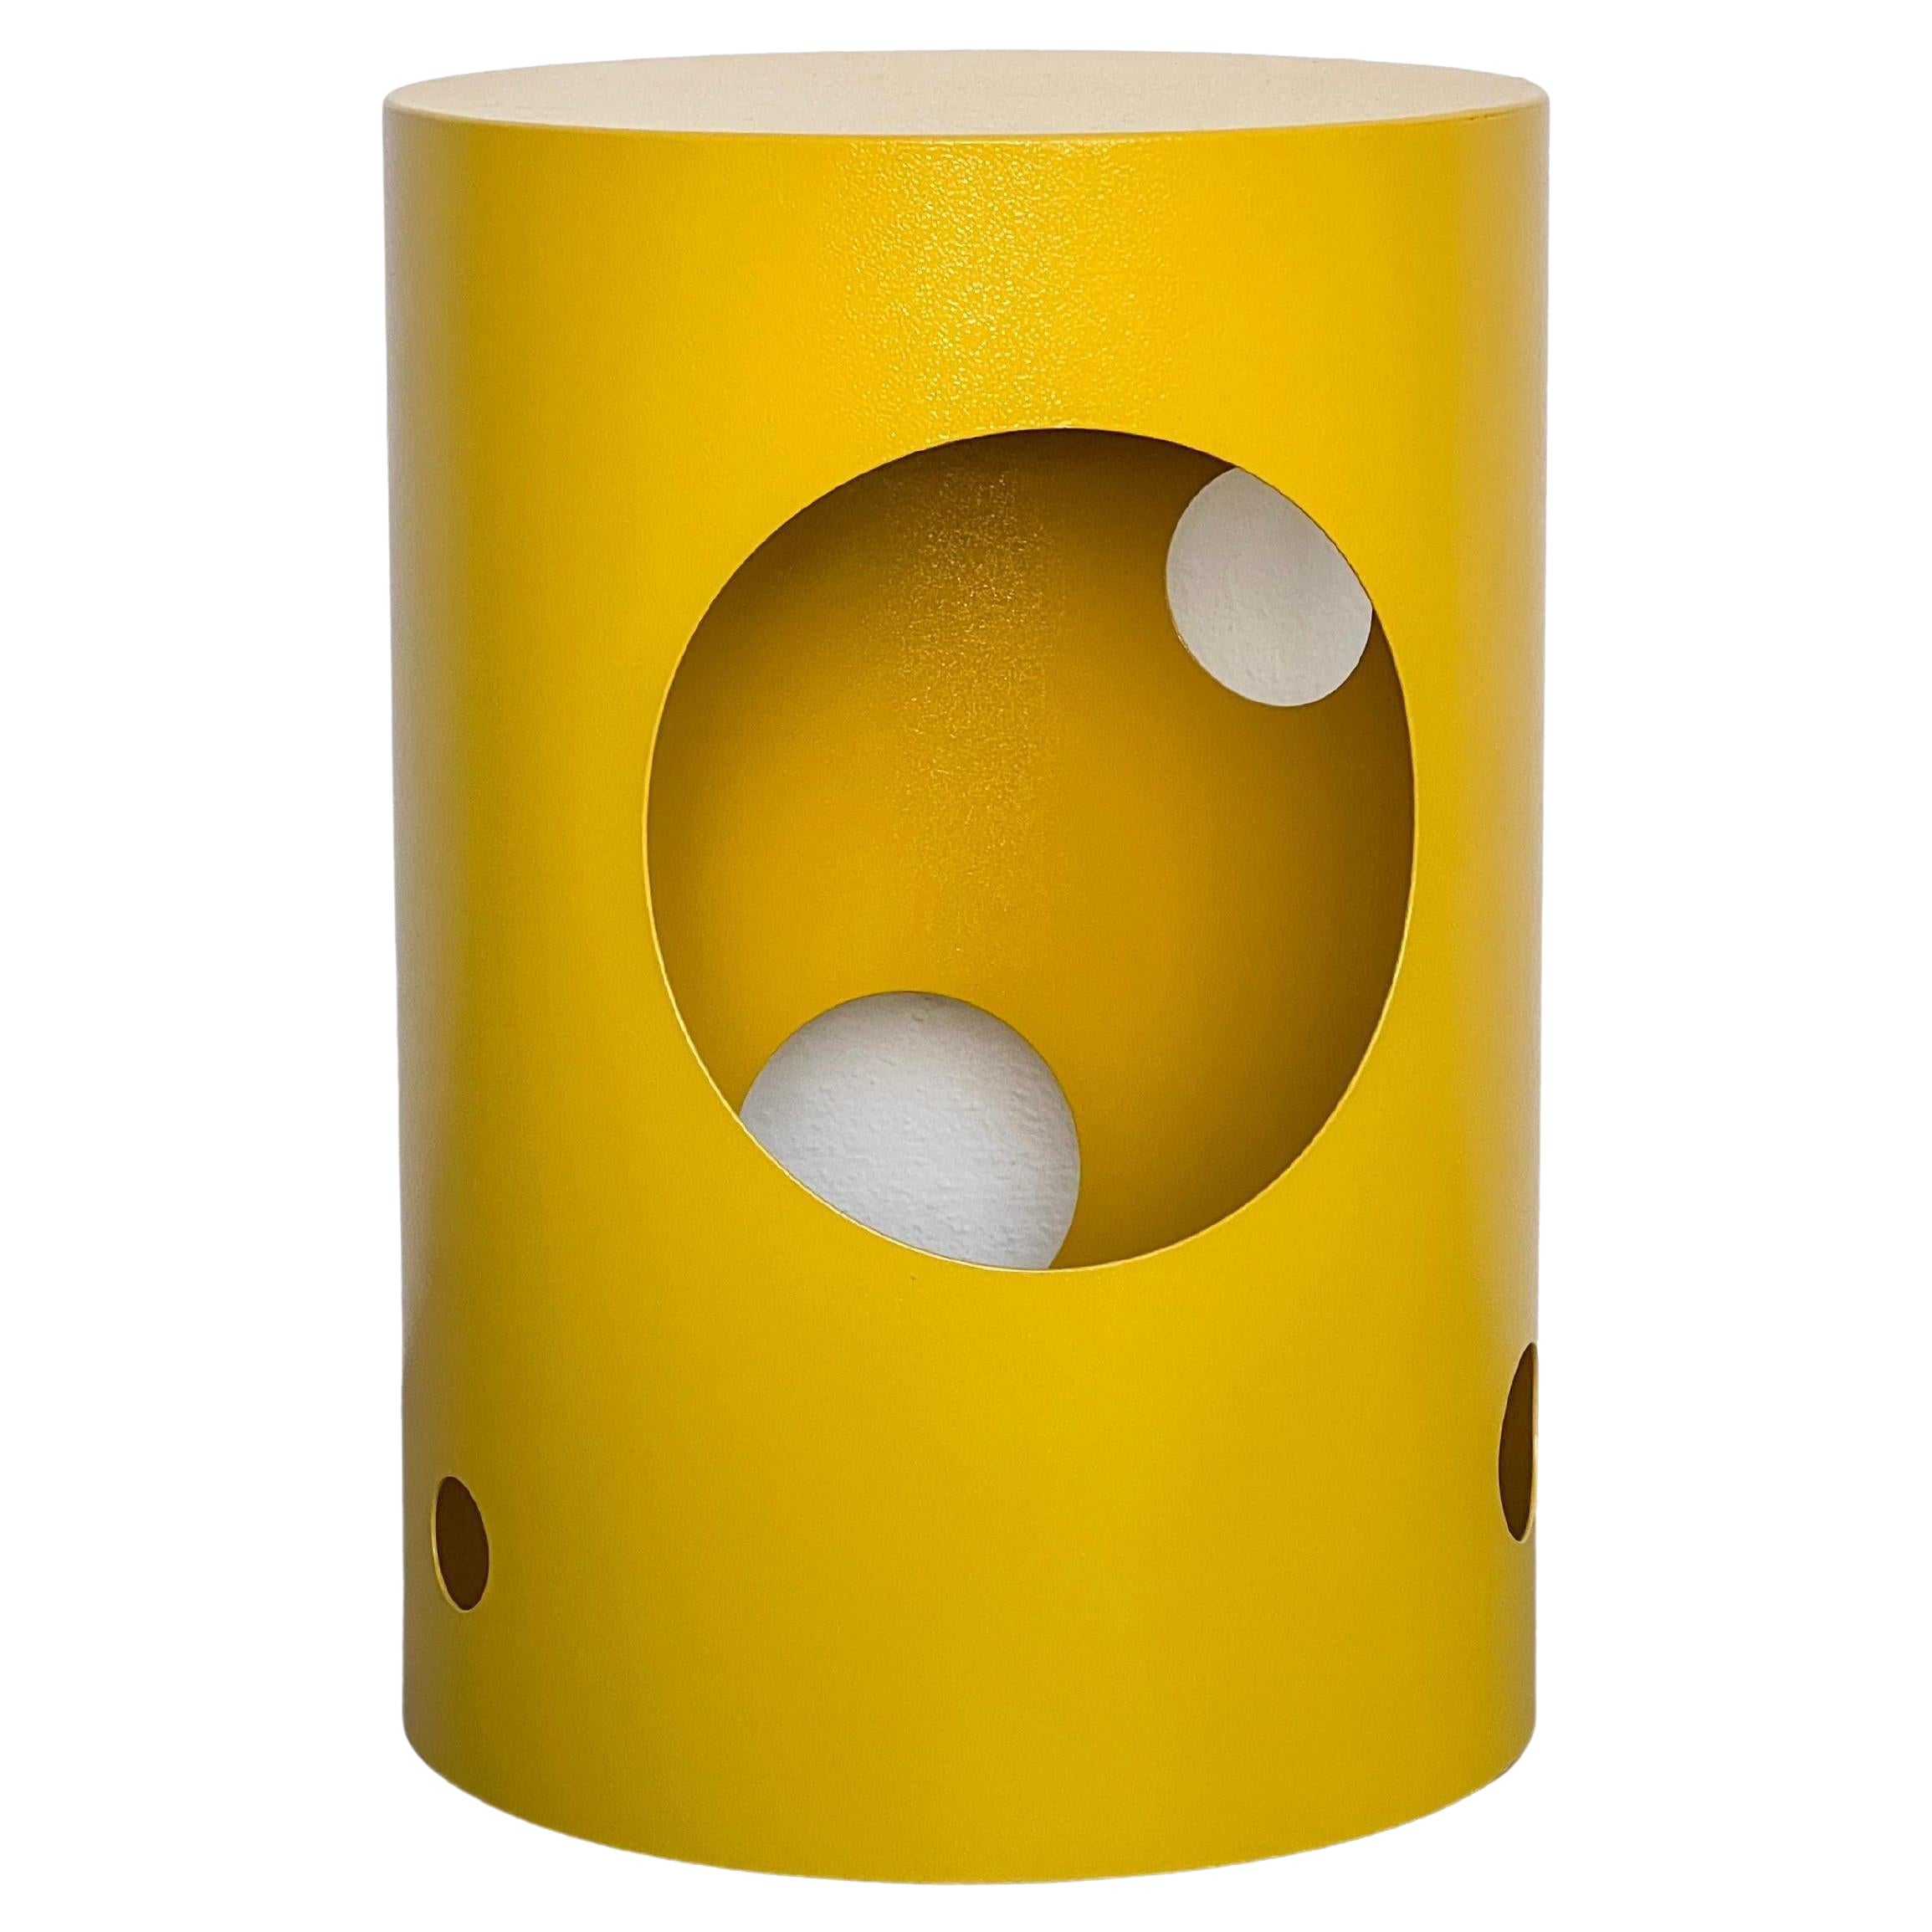 Contemporary 21st Century Spinzi Silös Stool, Side Table, Bright Yellow (tabouret, table d'appoint, jaune vif)